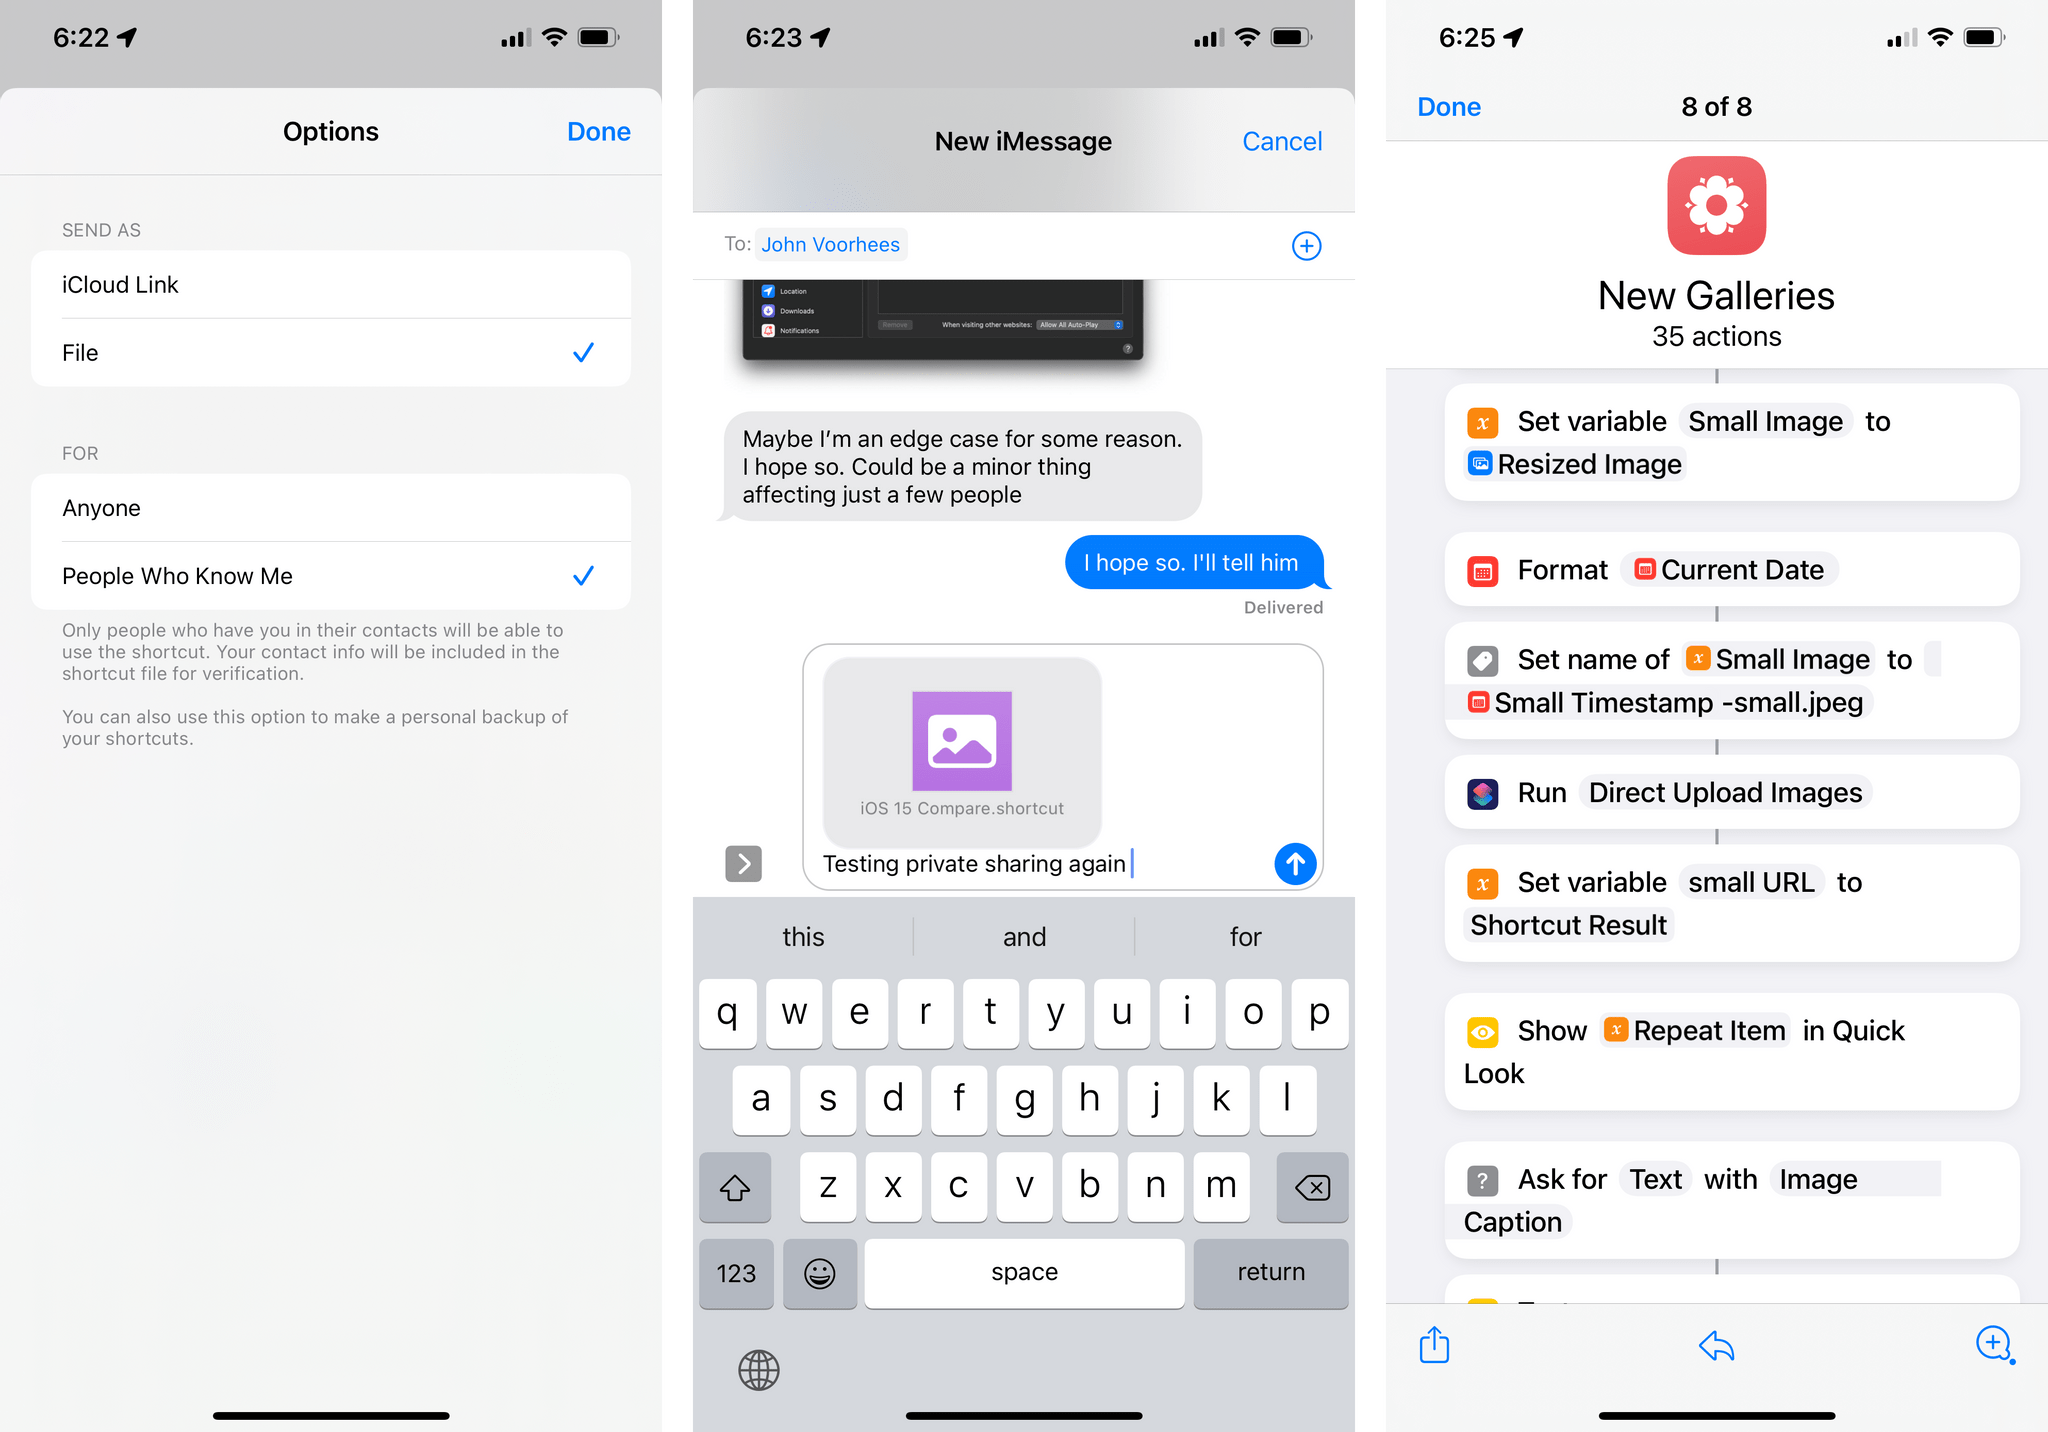 You can export shortcuts privately as files and share them with your friends on iMessage.